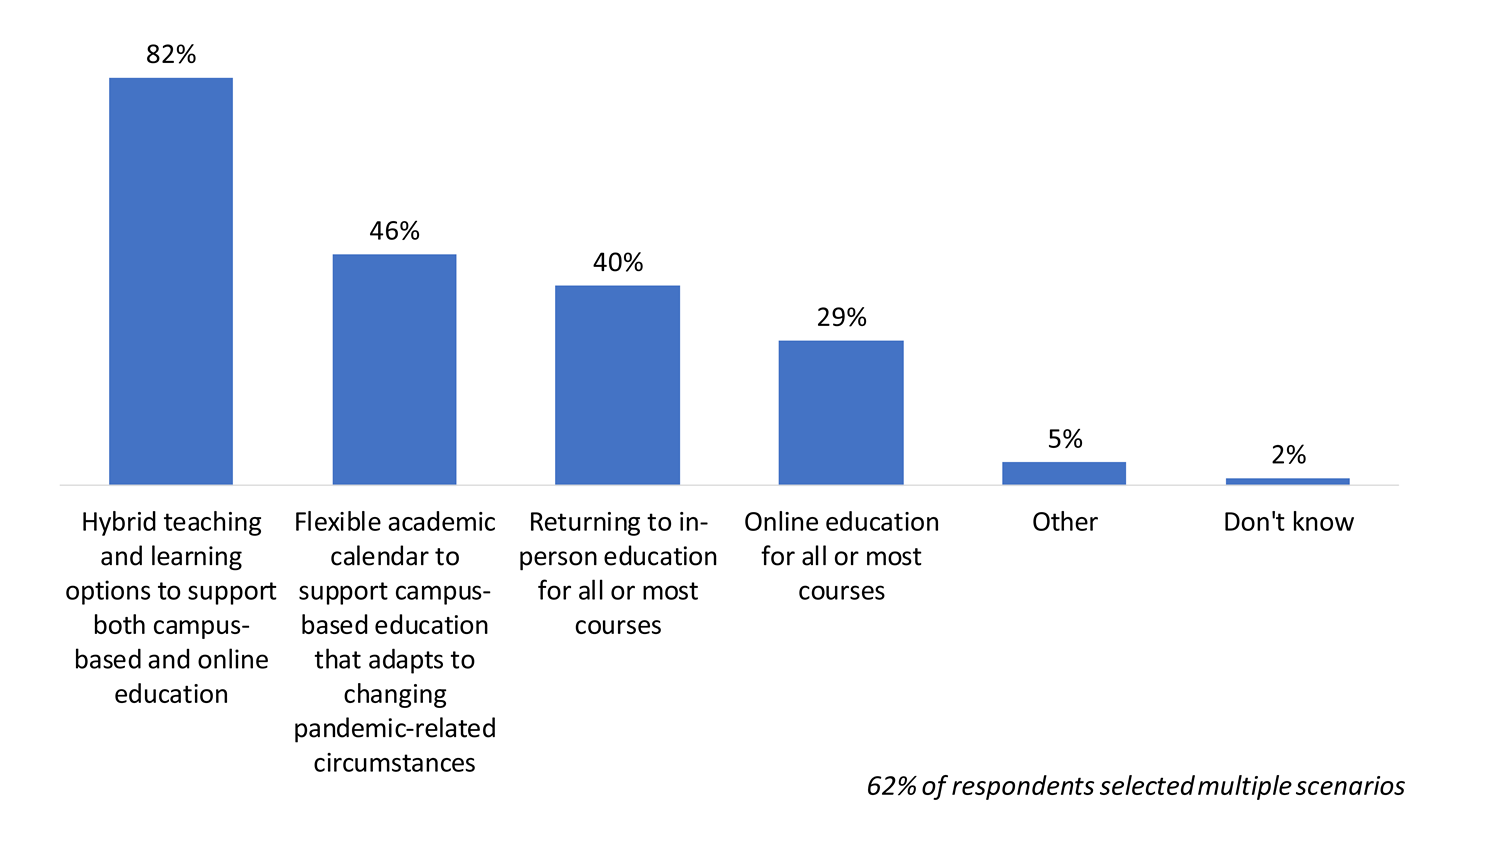 Bar chart illustrating teaching and learning scenarios guiding fall planning